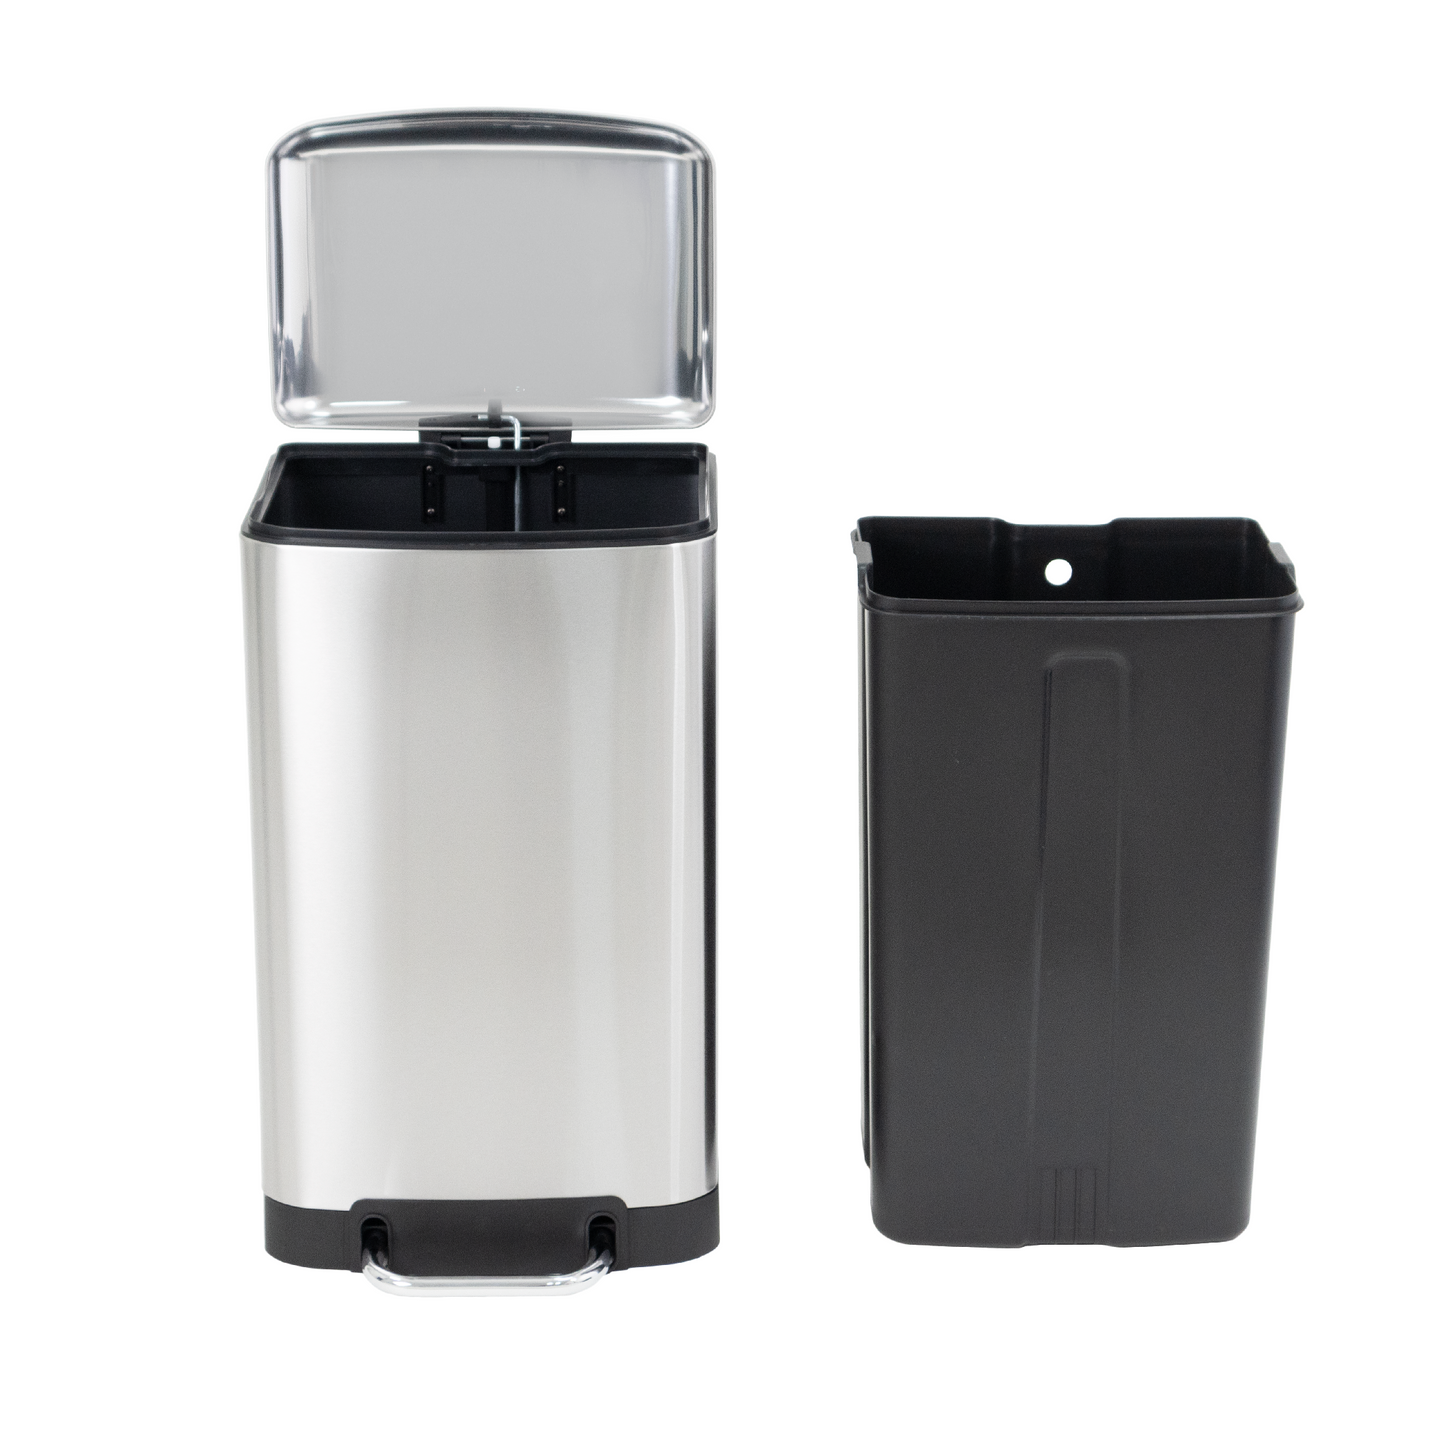 GREENWICH Design 40L kitchen pedal bin in stainless steel with domed lid bucket